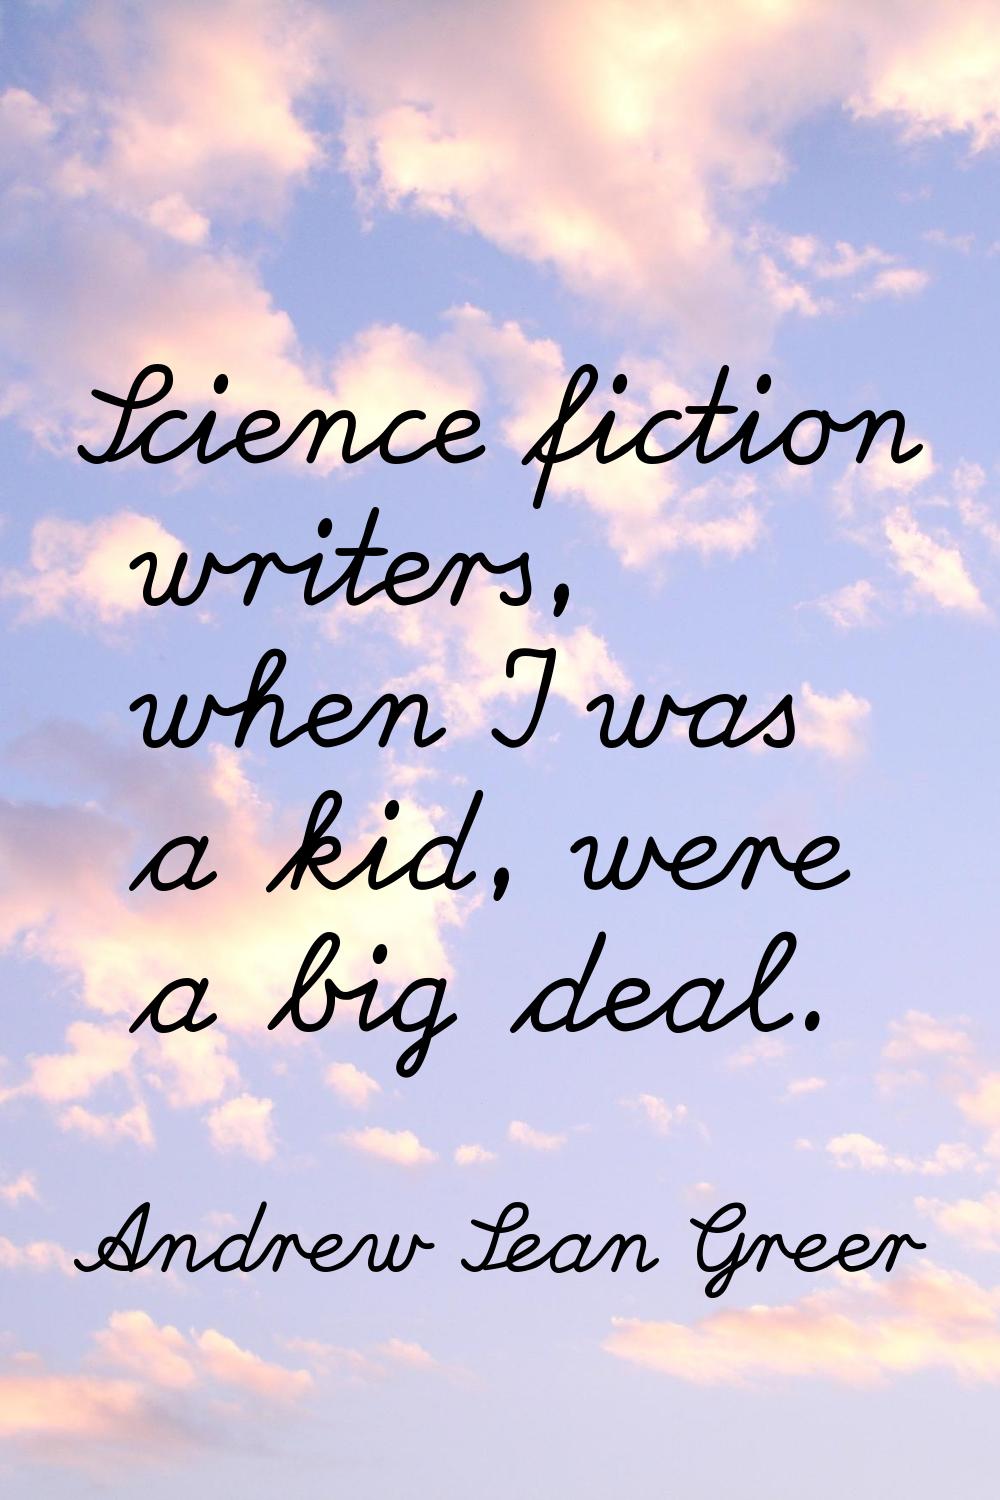 Science fiction writers, when I was a kid, were a big deal.